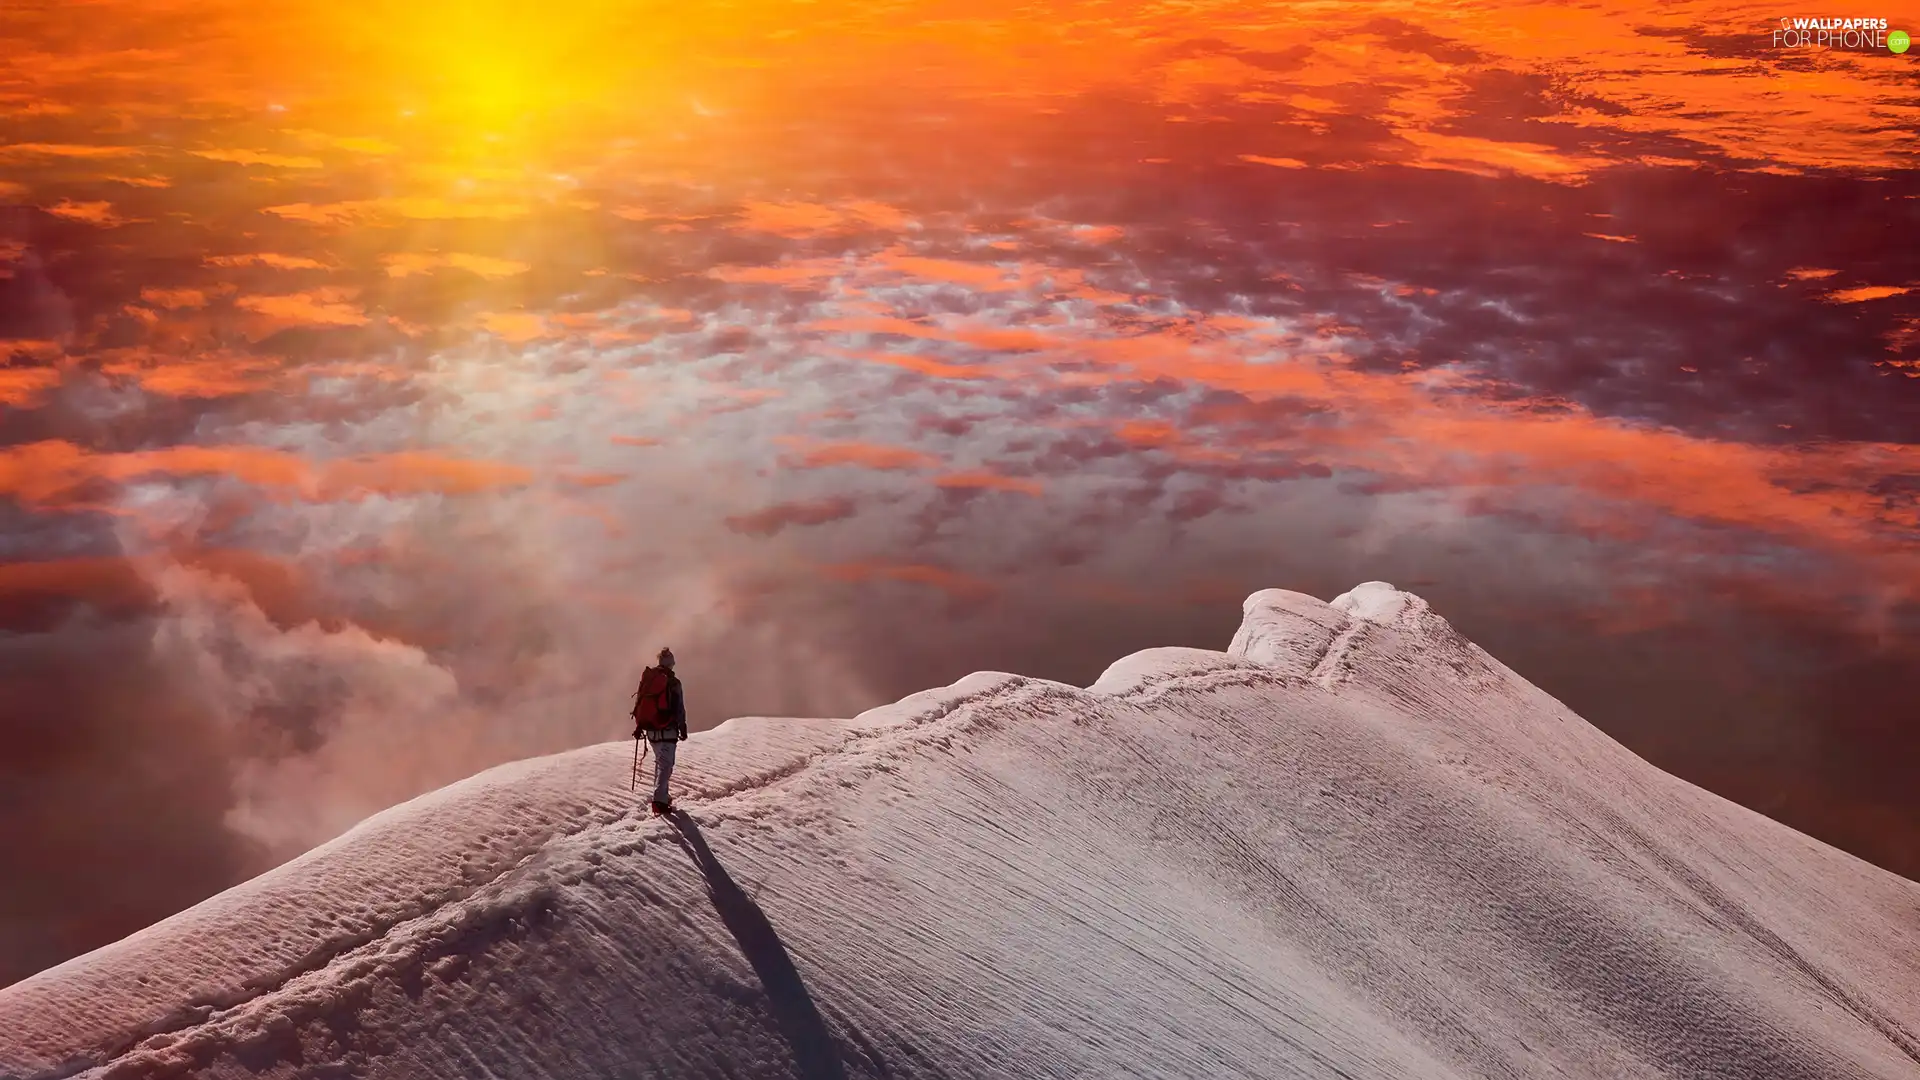 mountainous, Path, clouds, snow, Great Sunsets, mount, Mountains, Human